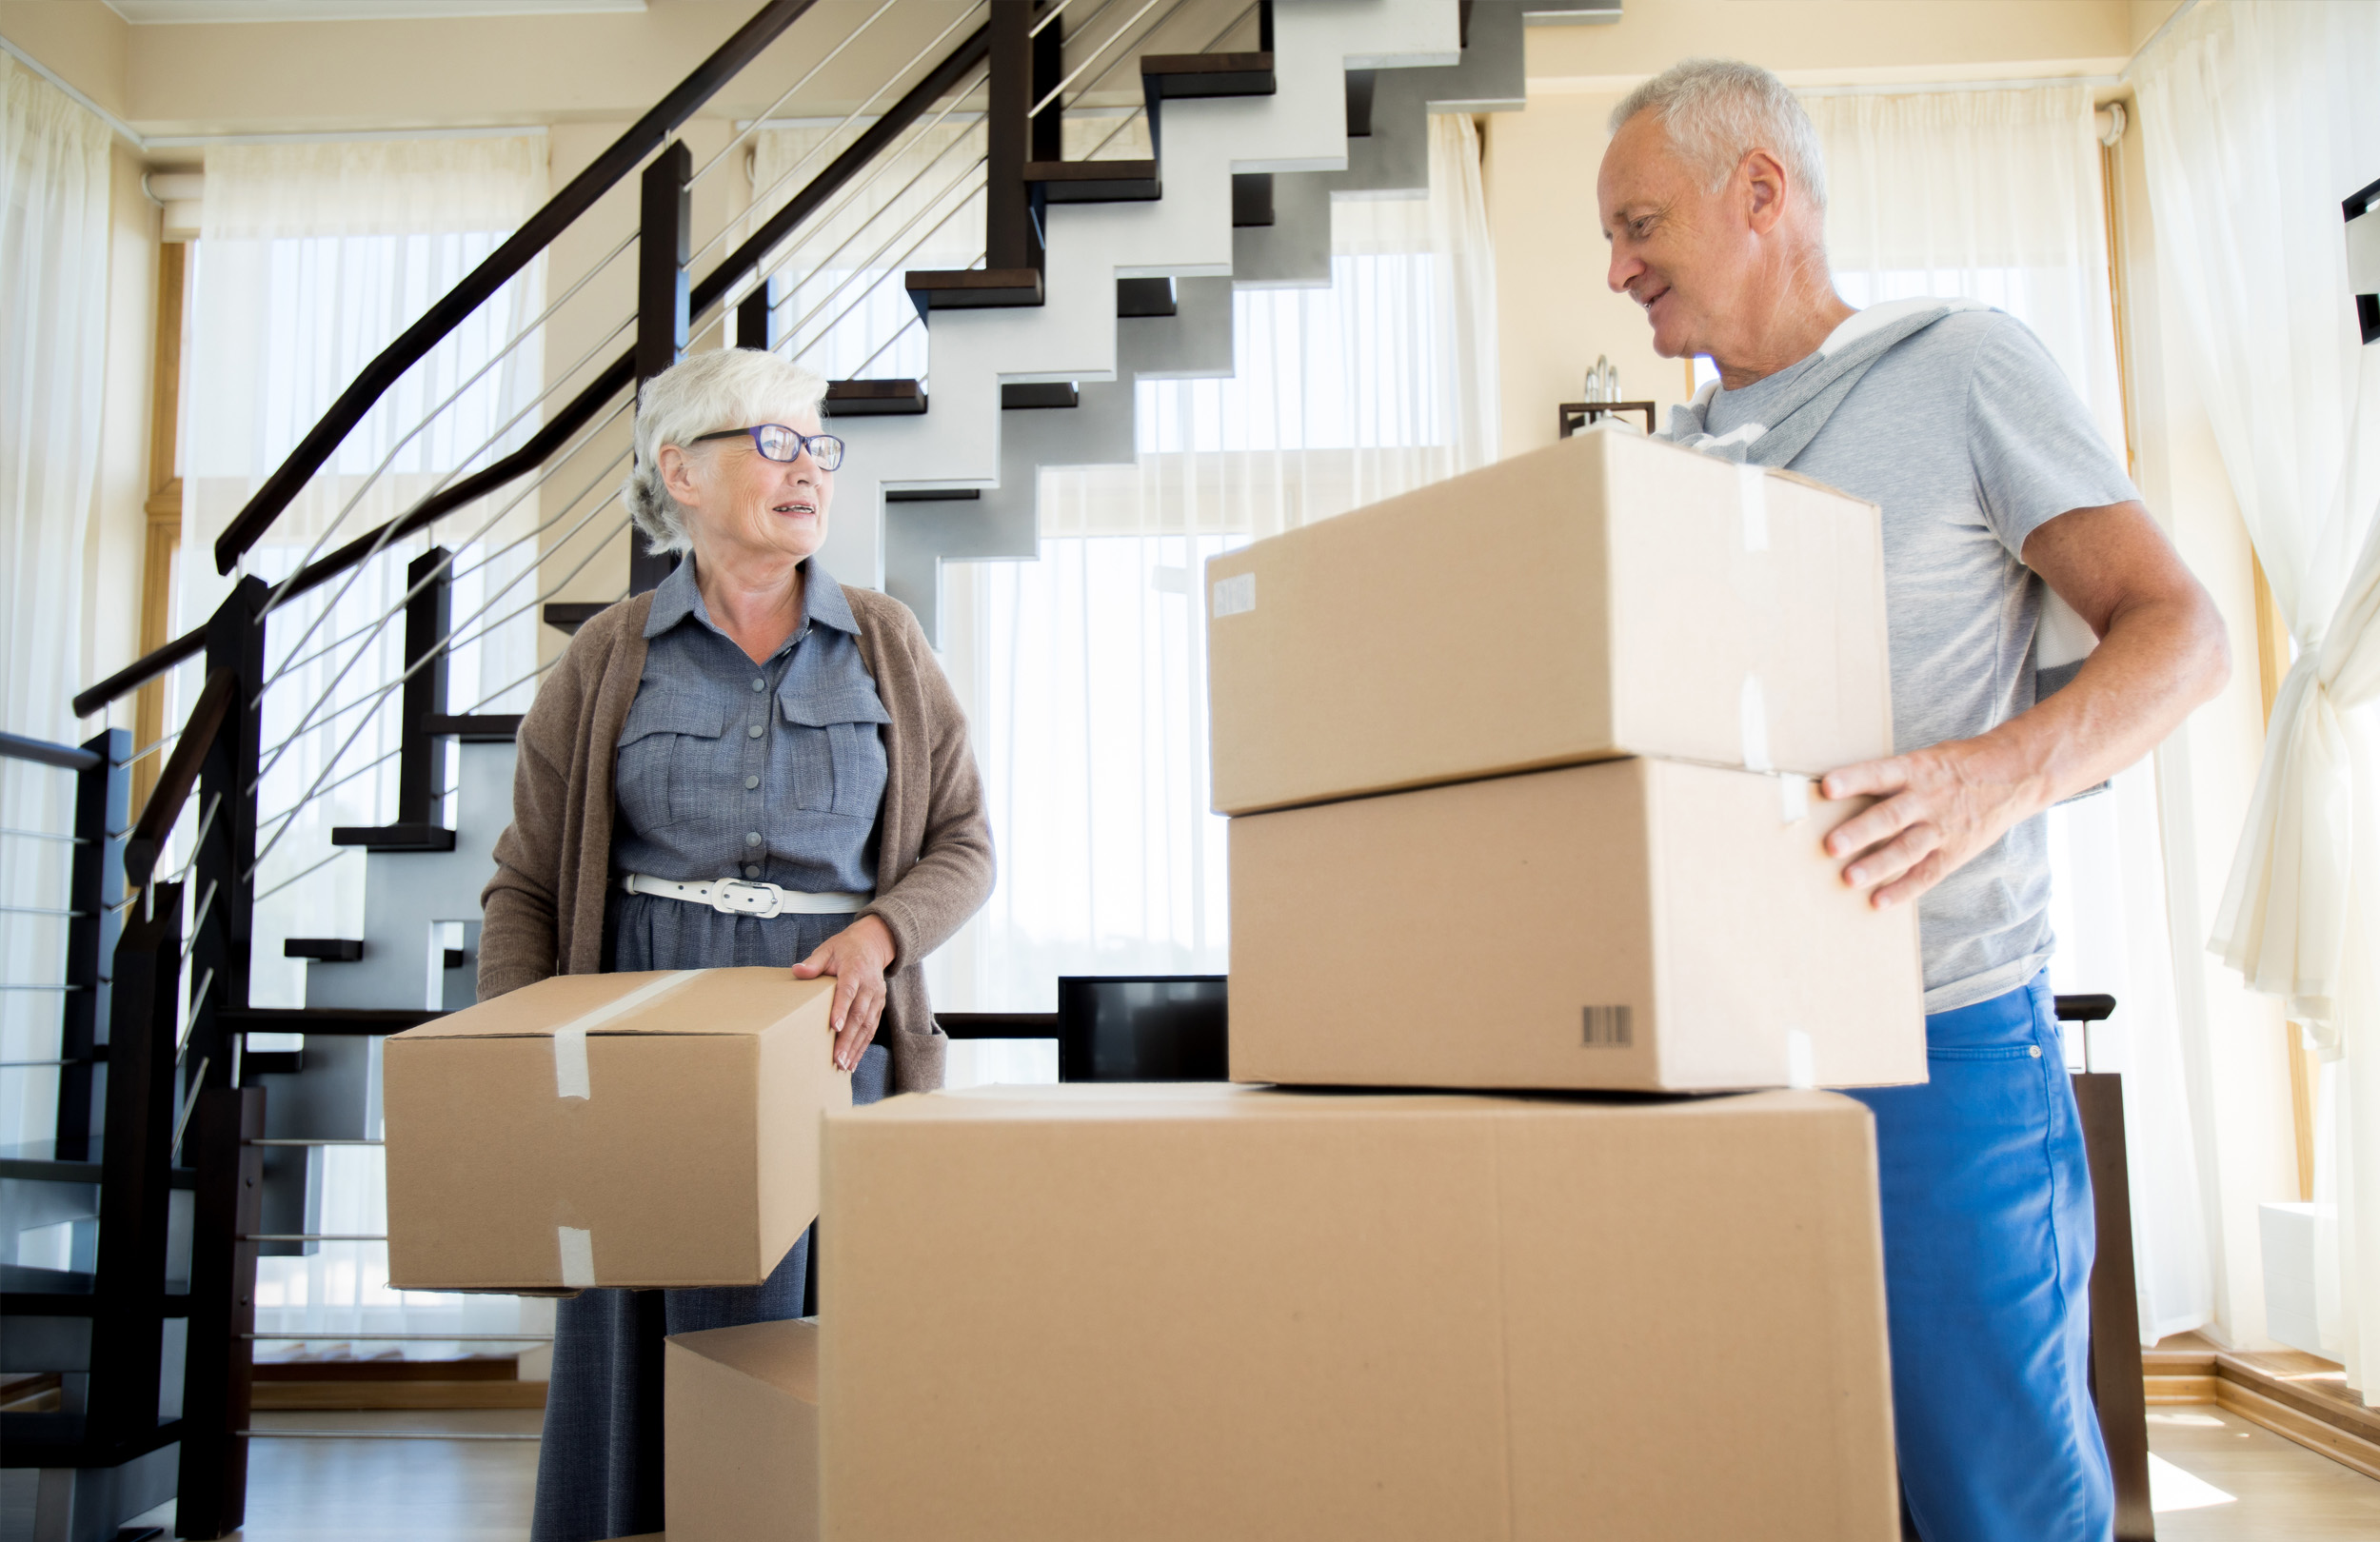 Tips for Seniors Planning a Move: Think “Resizing” Not “Downsizing”